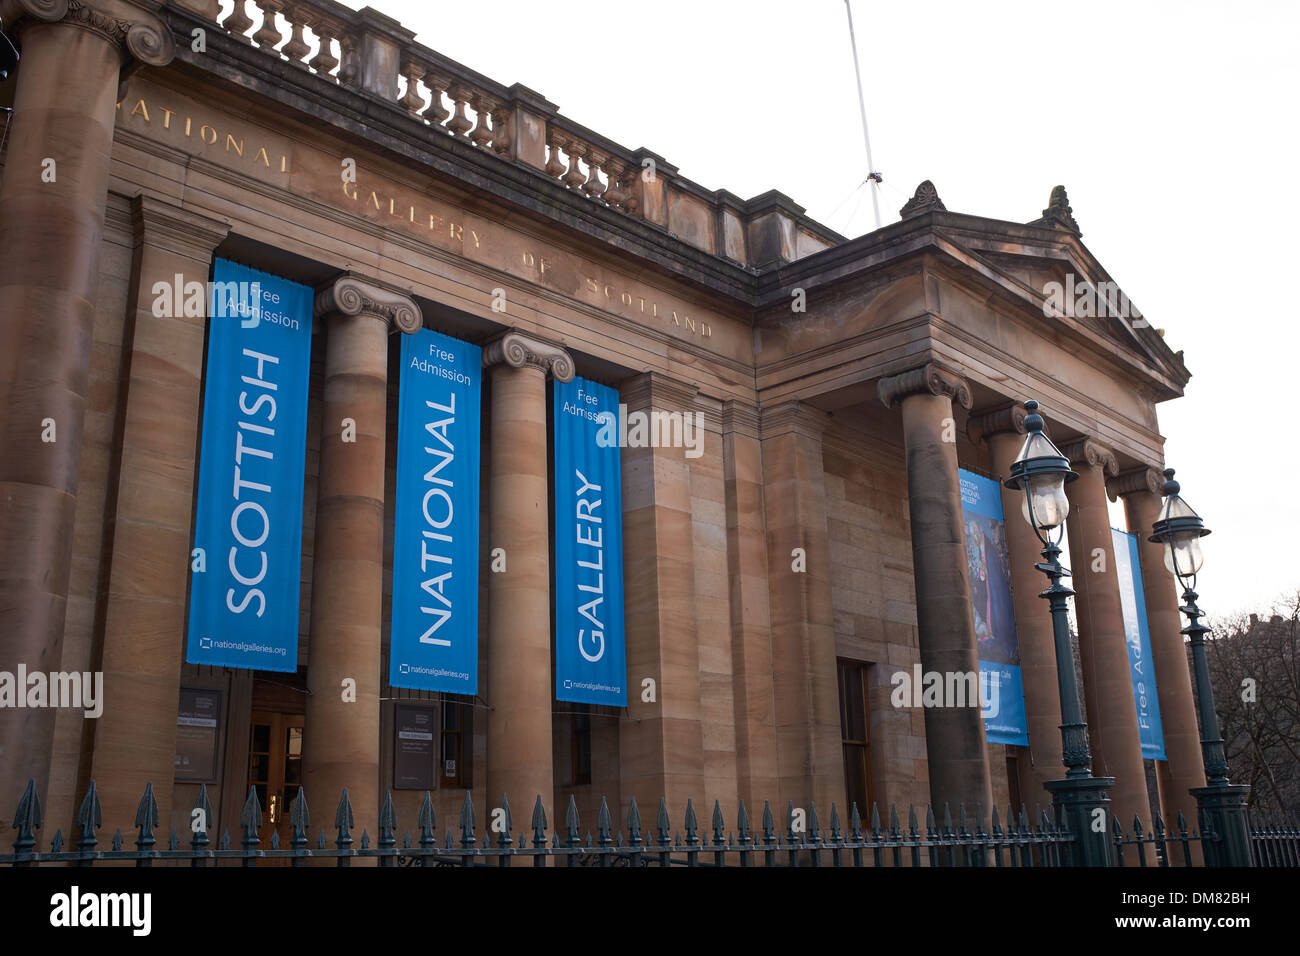 Exterior of the Scottish National Gallery in Edinburgh city centre Stock Photo